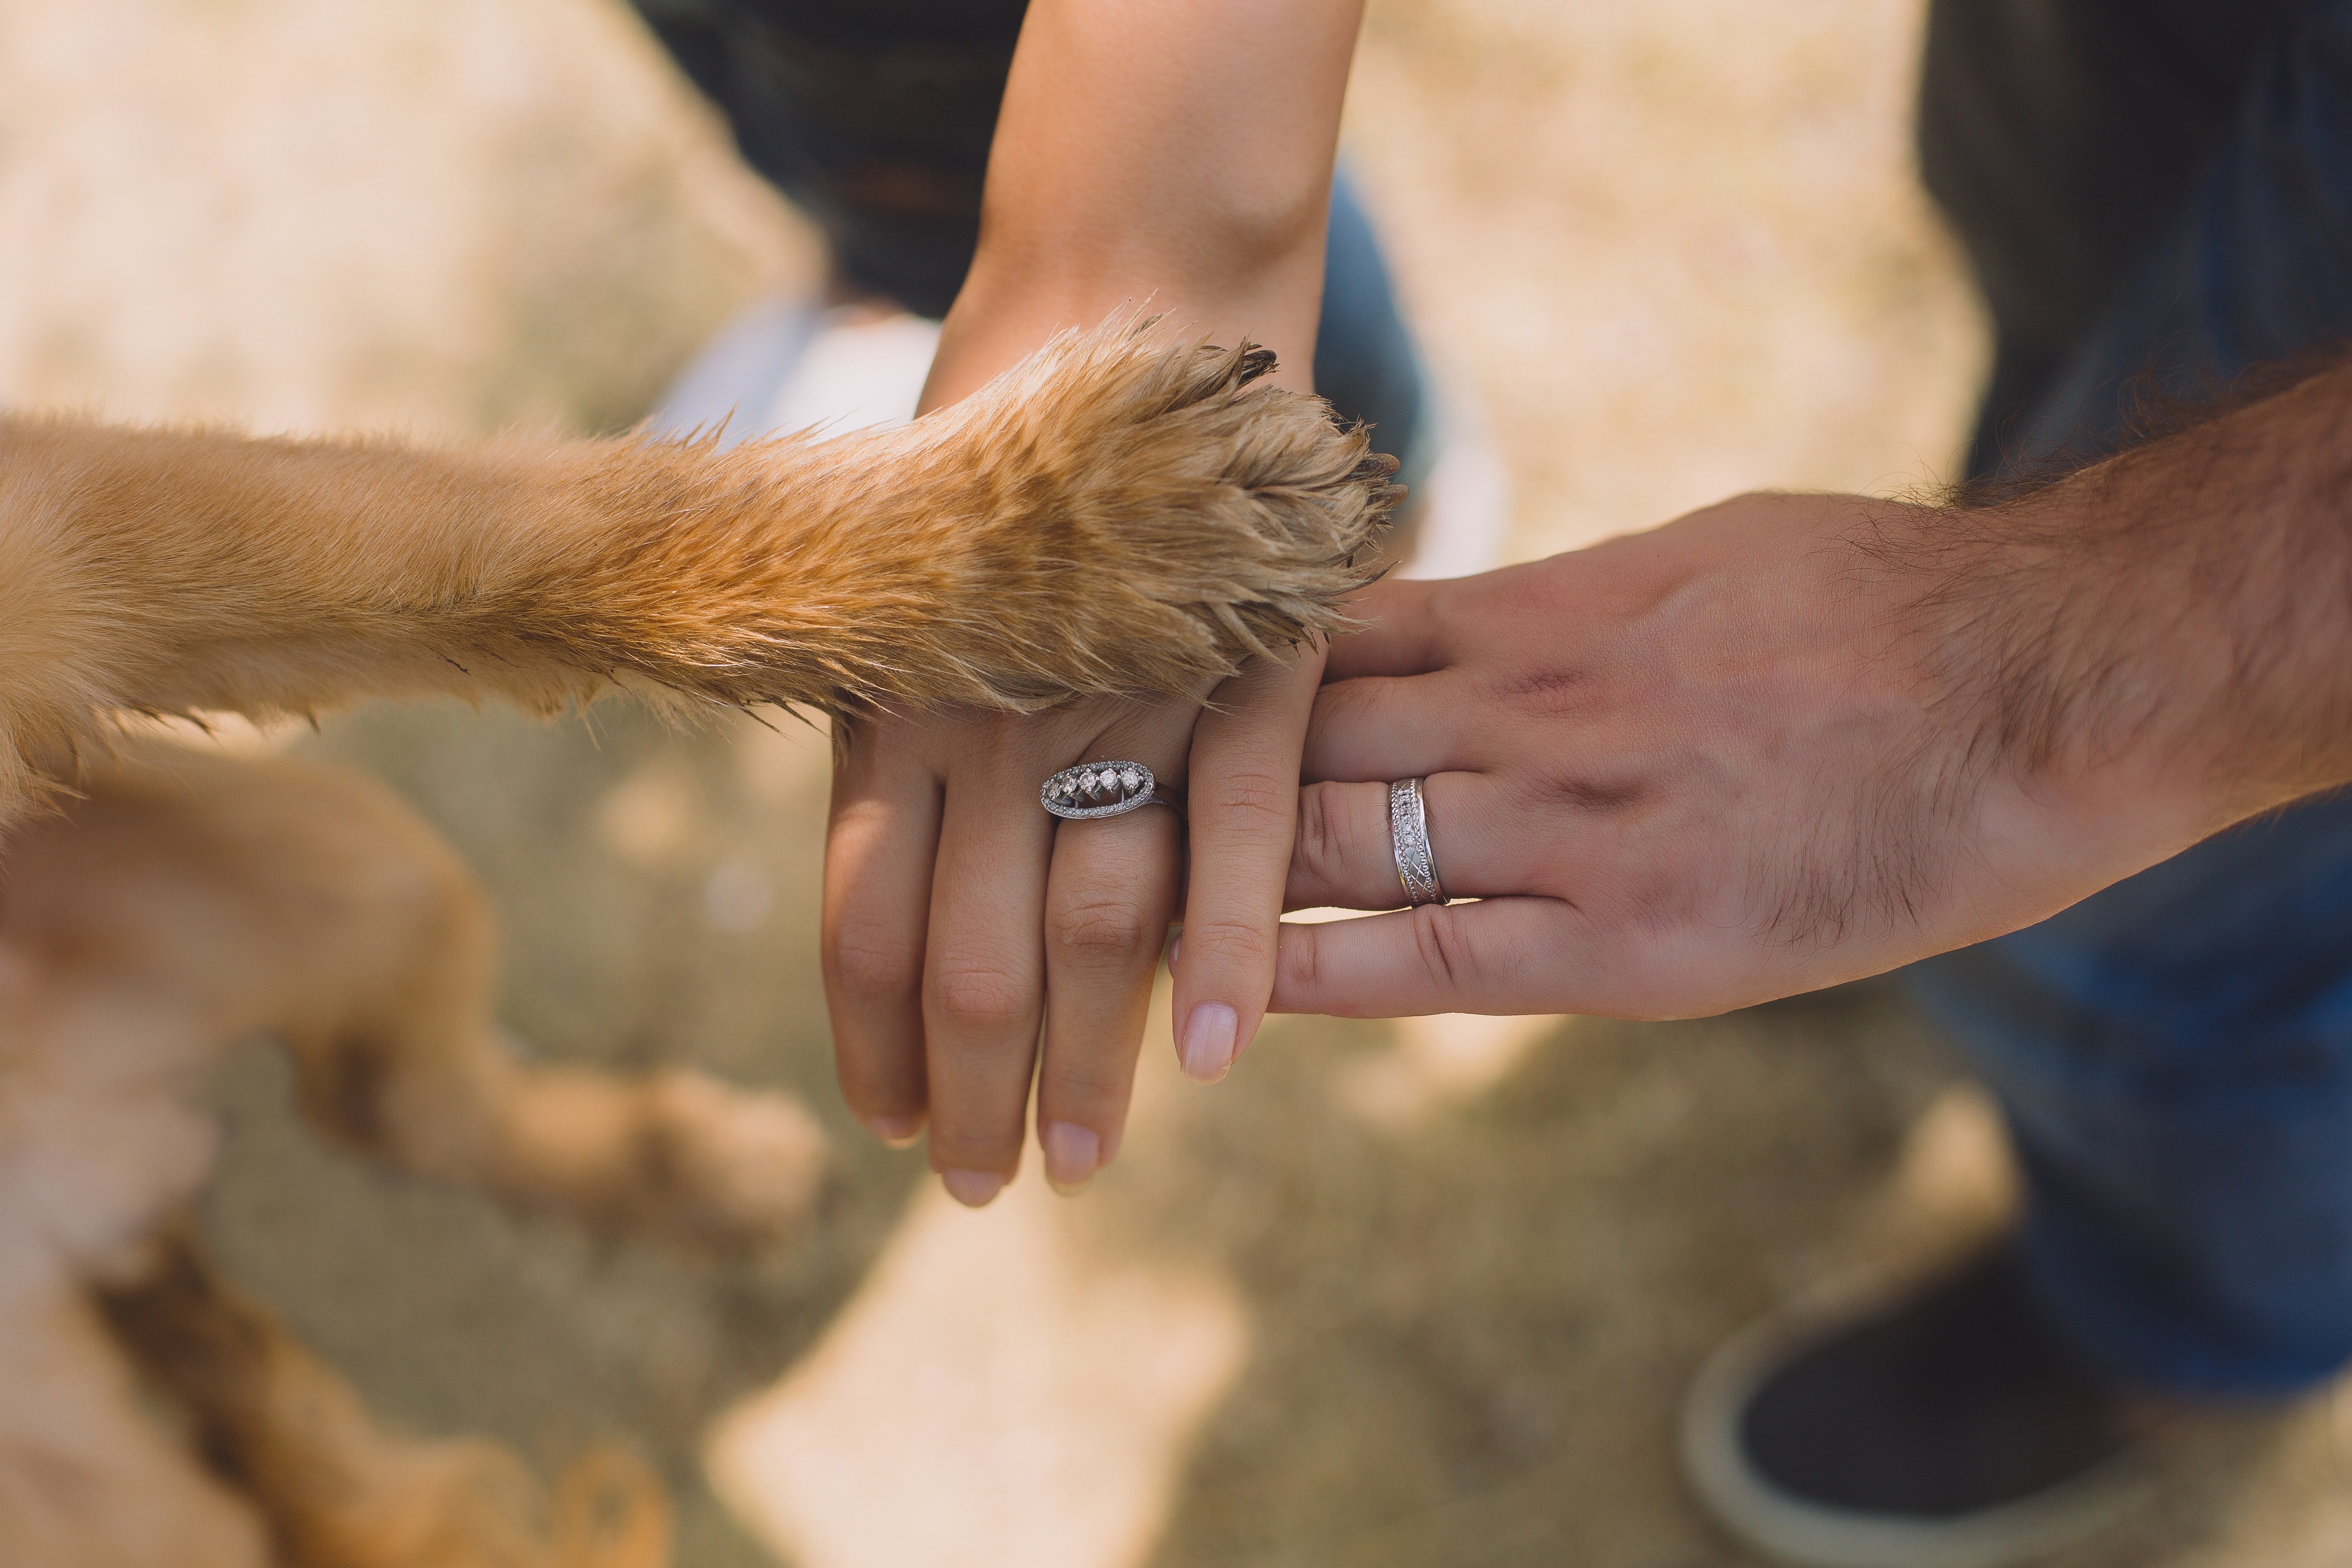 A dog's paw on top of a couple's hands | Source: Pexels.com